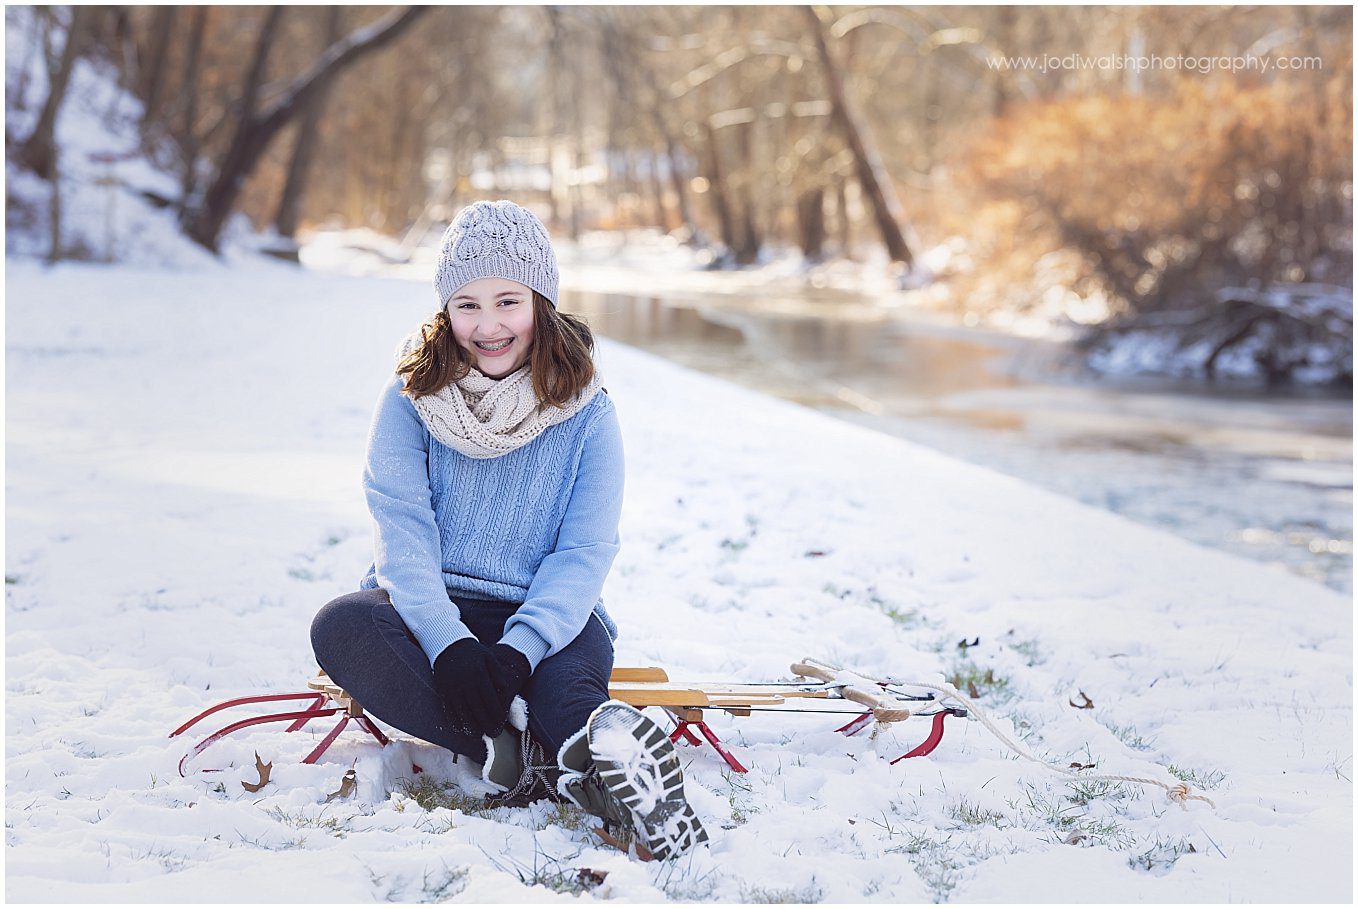 image of a teen girl sitting on a sled in the snow with a frozen creek behind her. She's wearing a light blue hat and sweater.